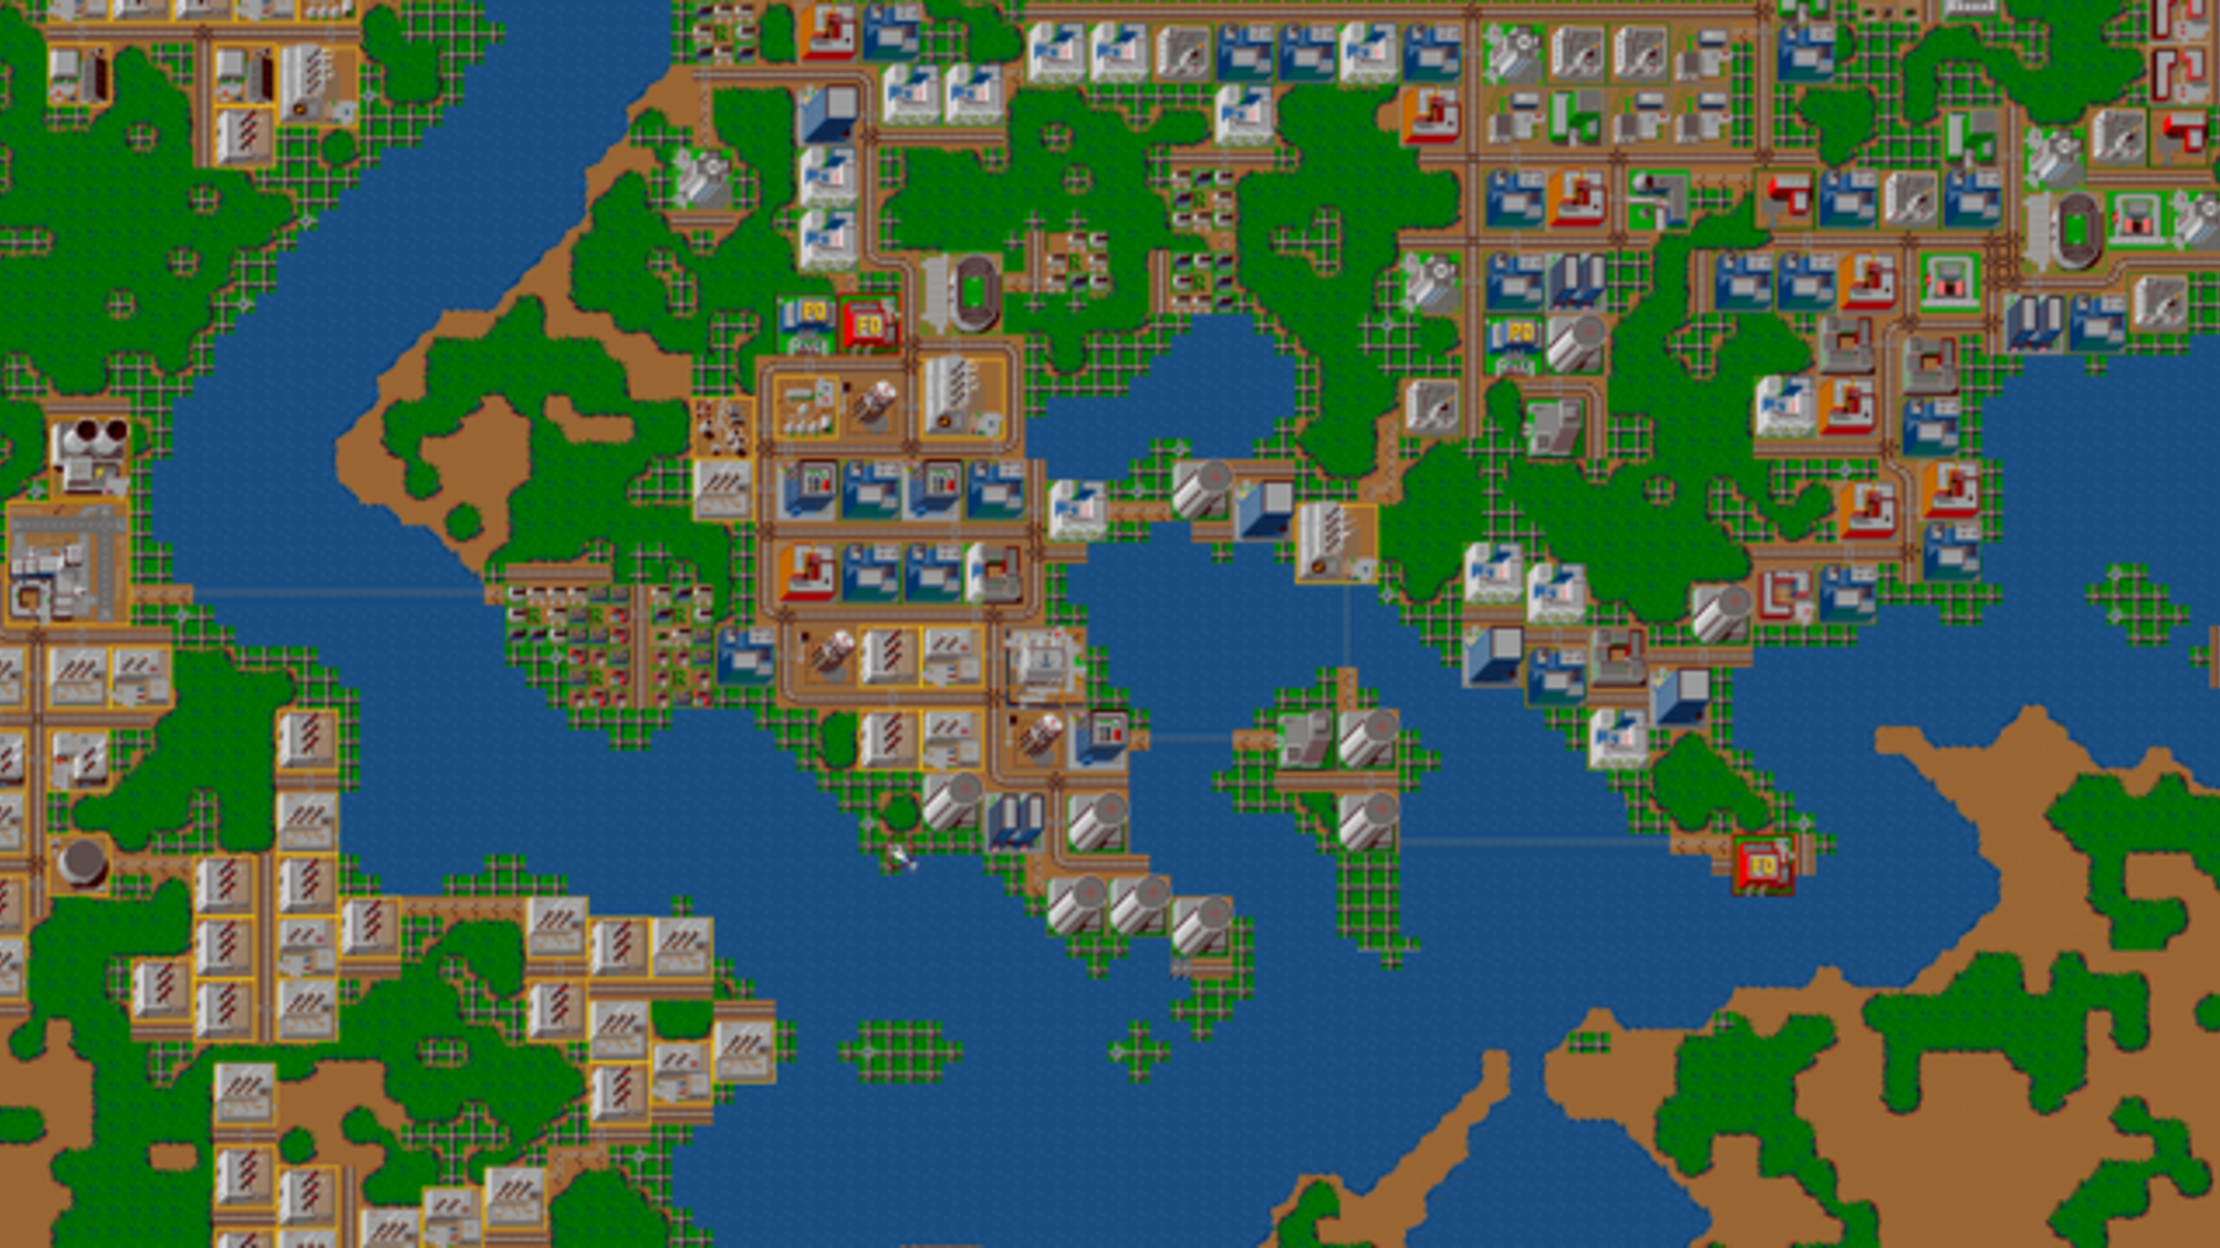 simcity (1989 video game)